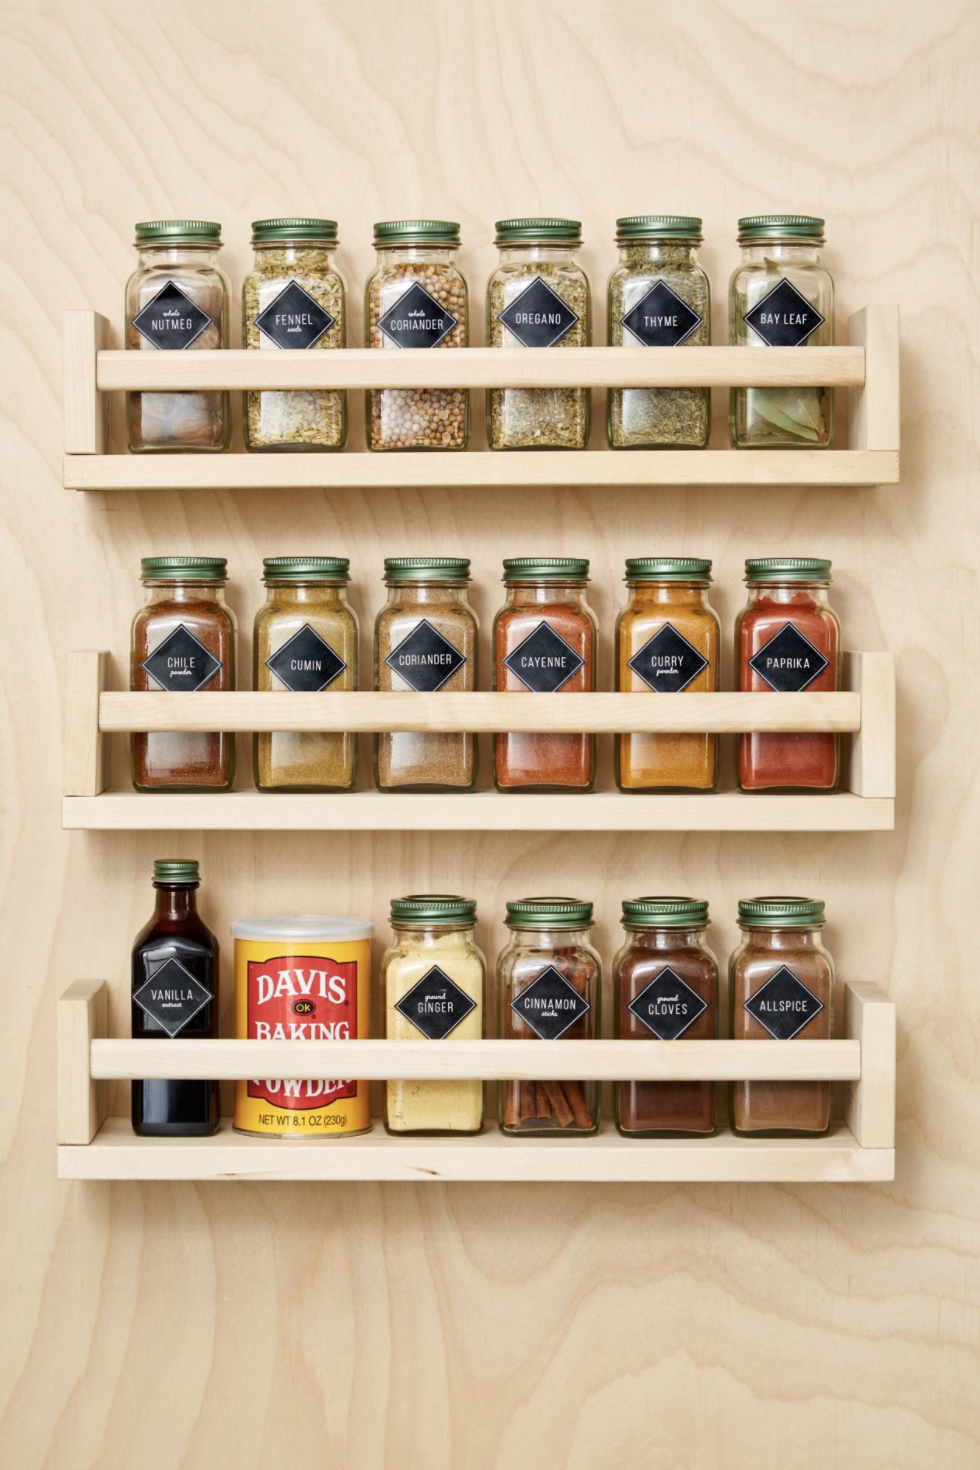 pantry organization ideas, three spice racks with labeled spices